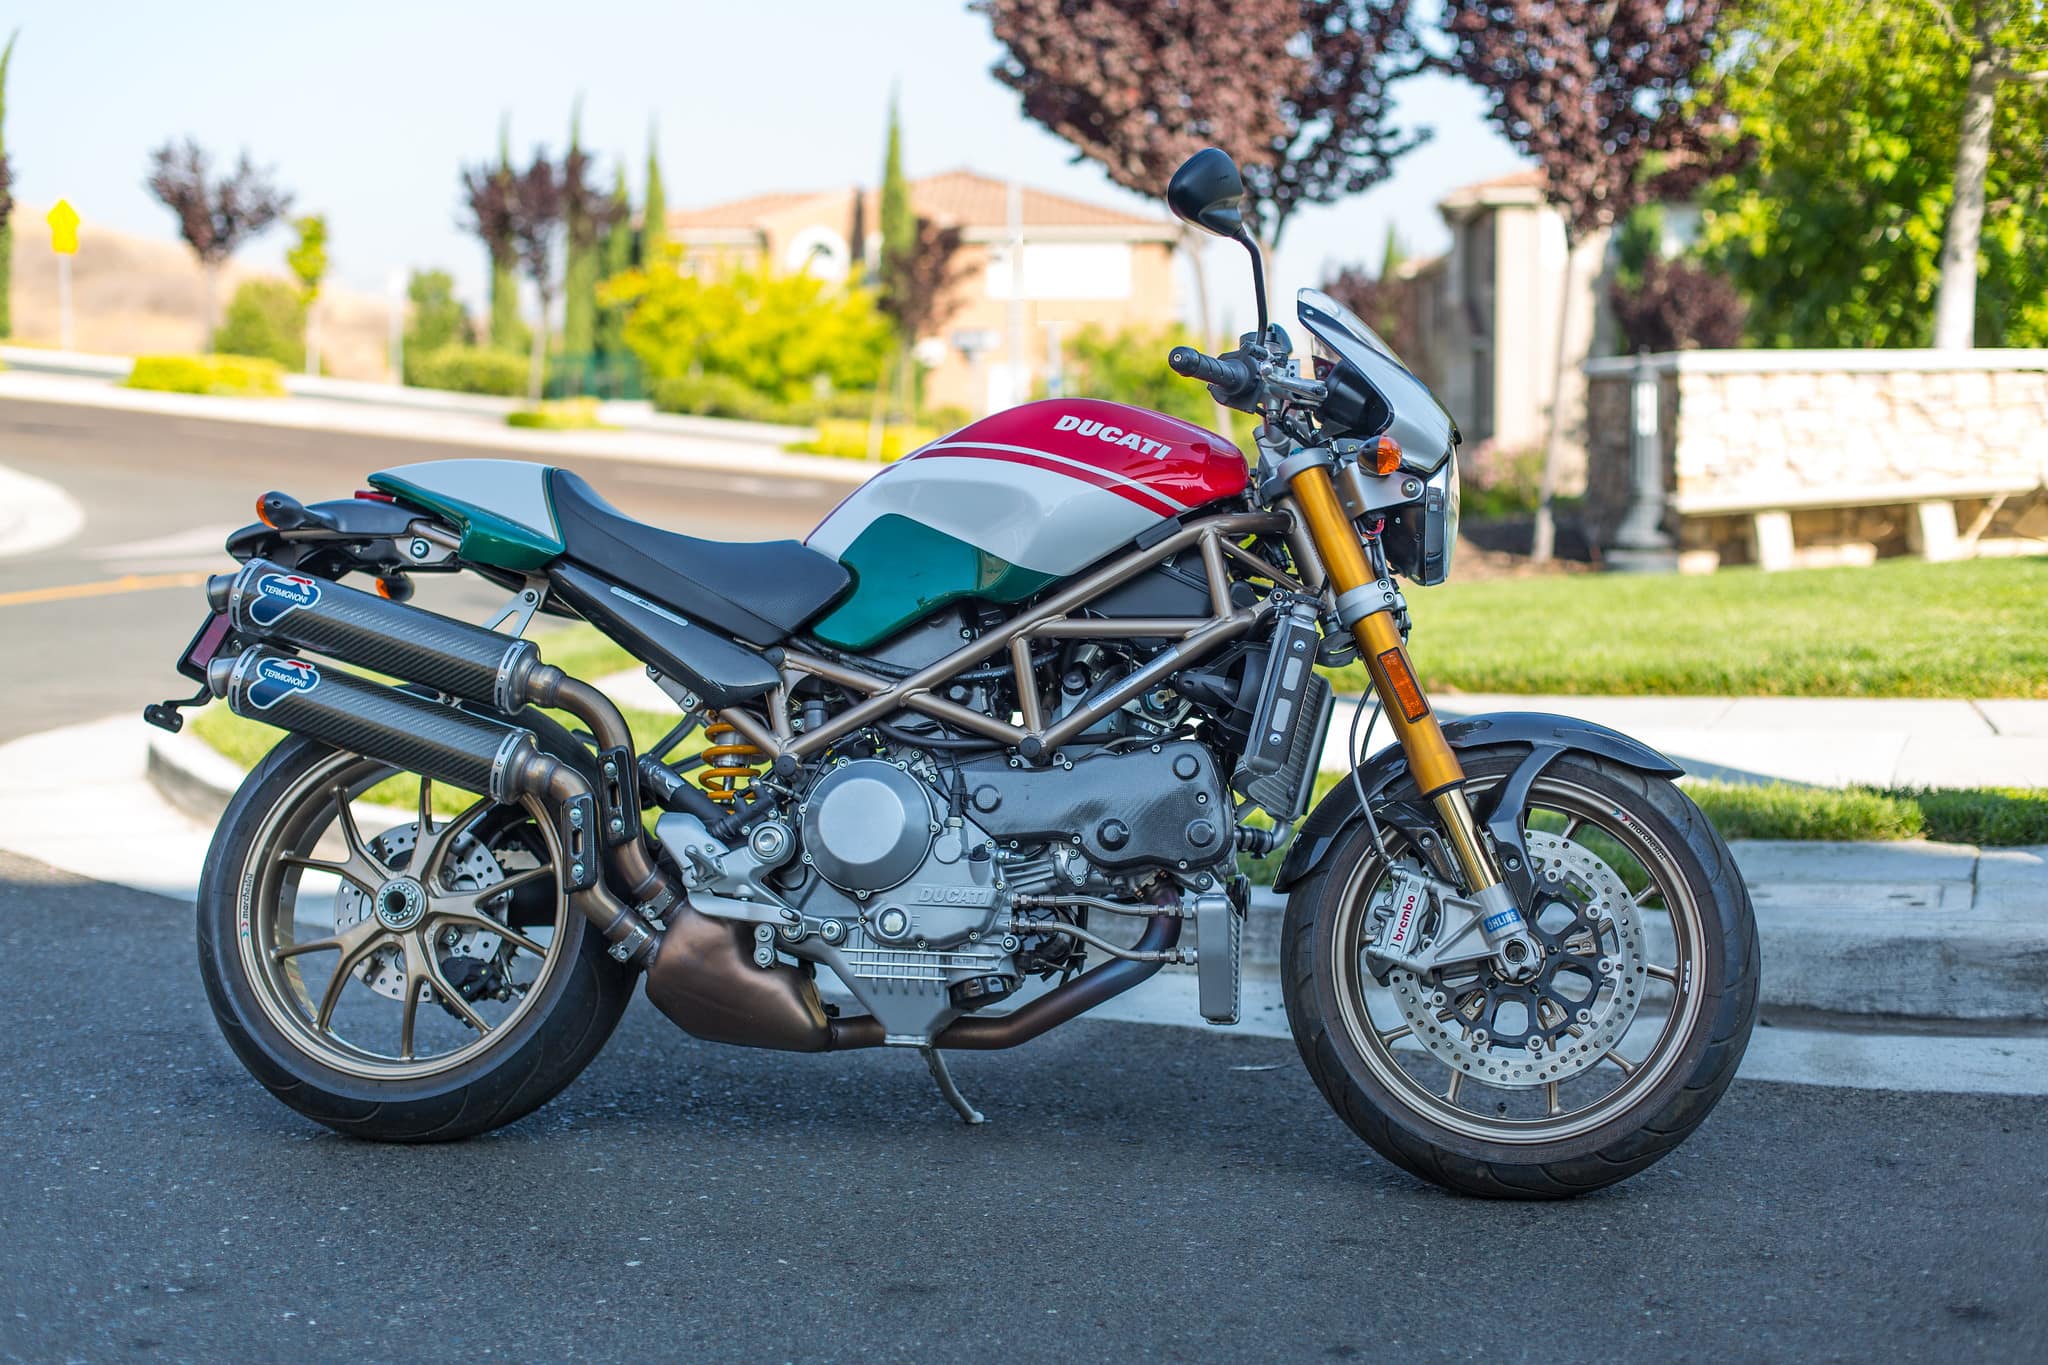 Ducati Monster buyers guide cover image, right hand side of ducati monster s4rs testastretta in red green and white